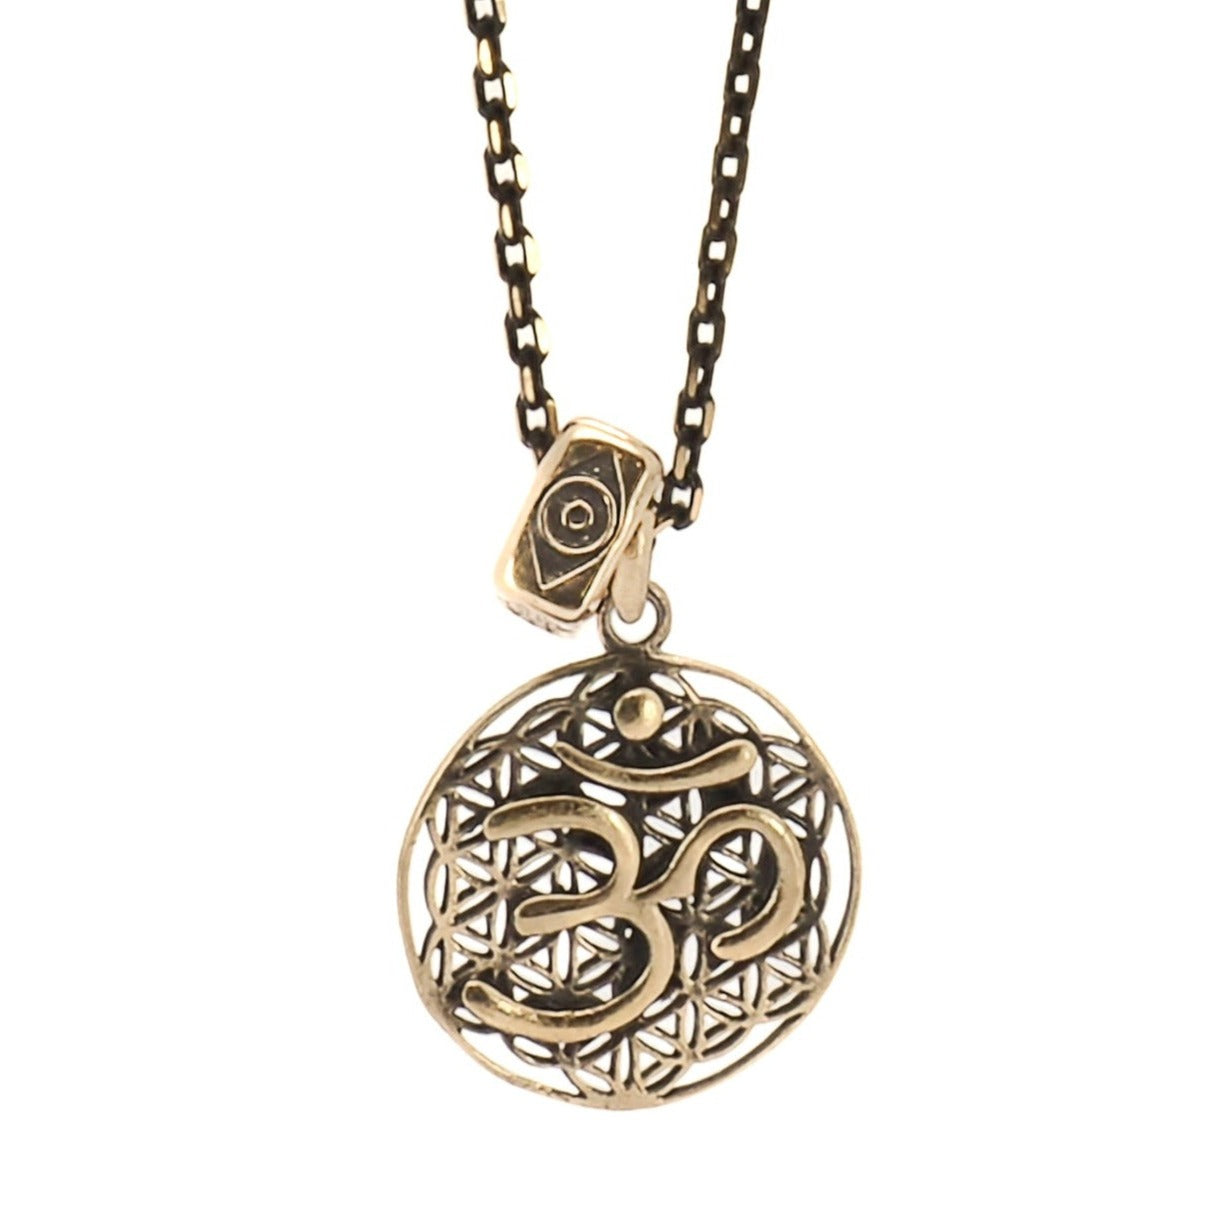 The Spiritual Symbols Om Necklace, featuring a beautiful gold-plated Om pendant on a bronze long chain, representing spirituality and consciousness.